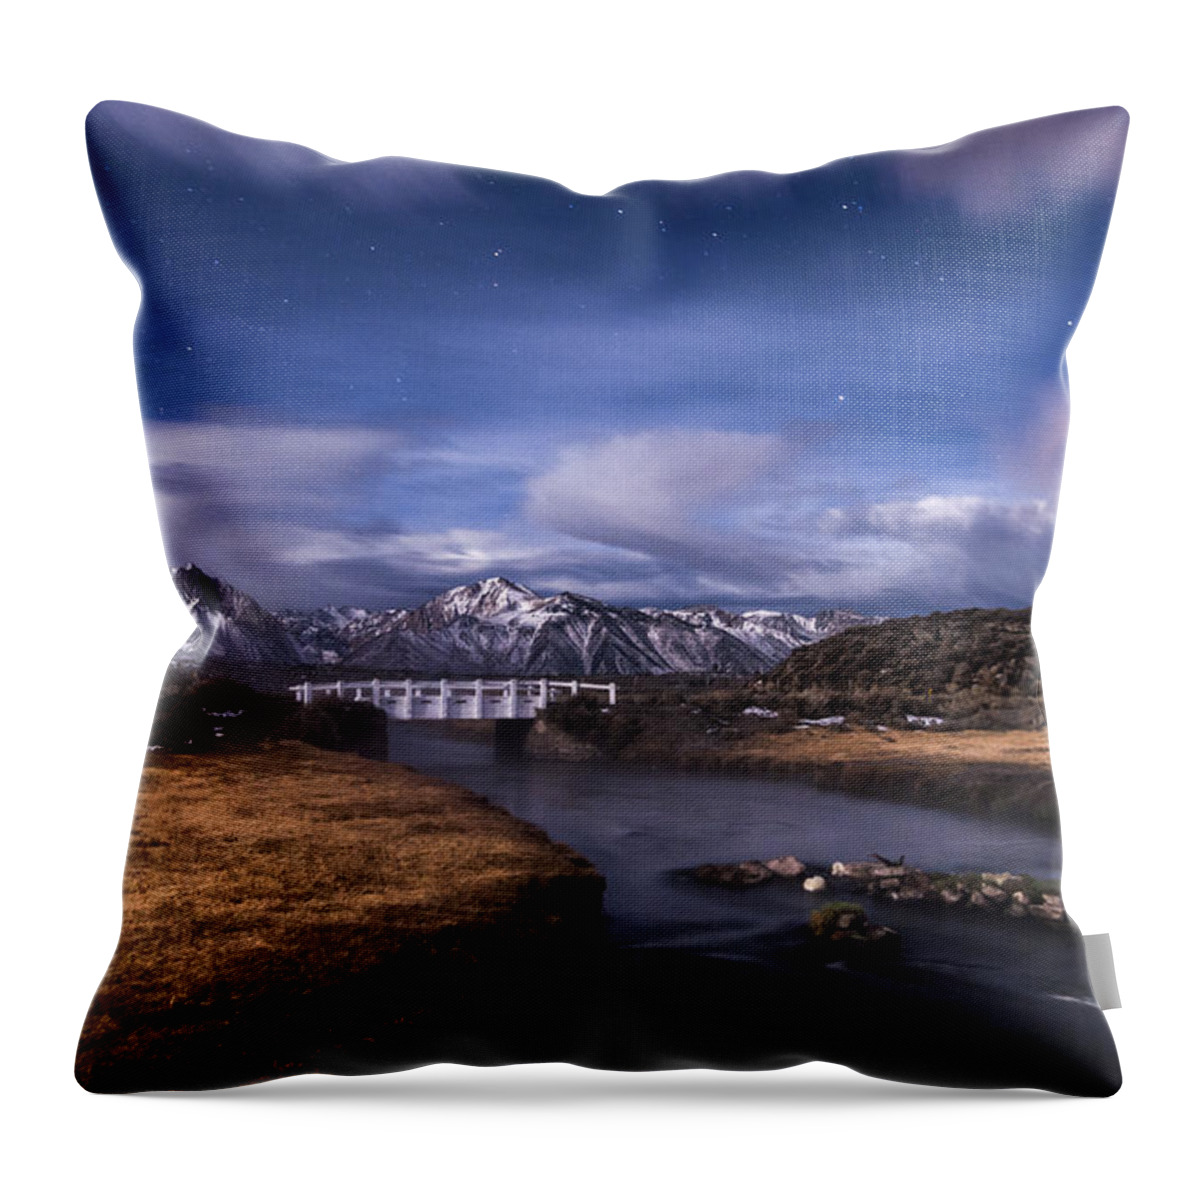 California Throw Pillow featuring the photograph Hot Creek Bridge by Cat Connor